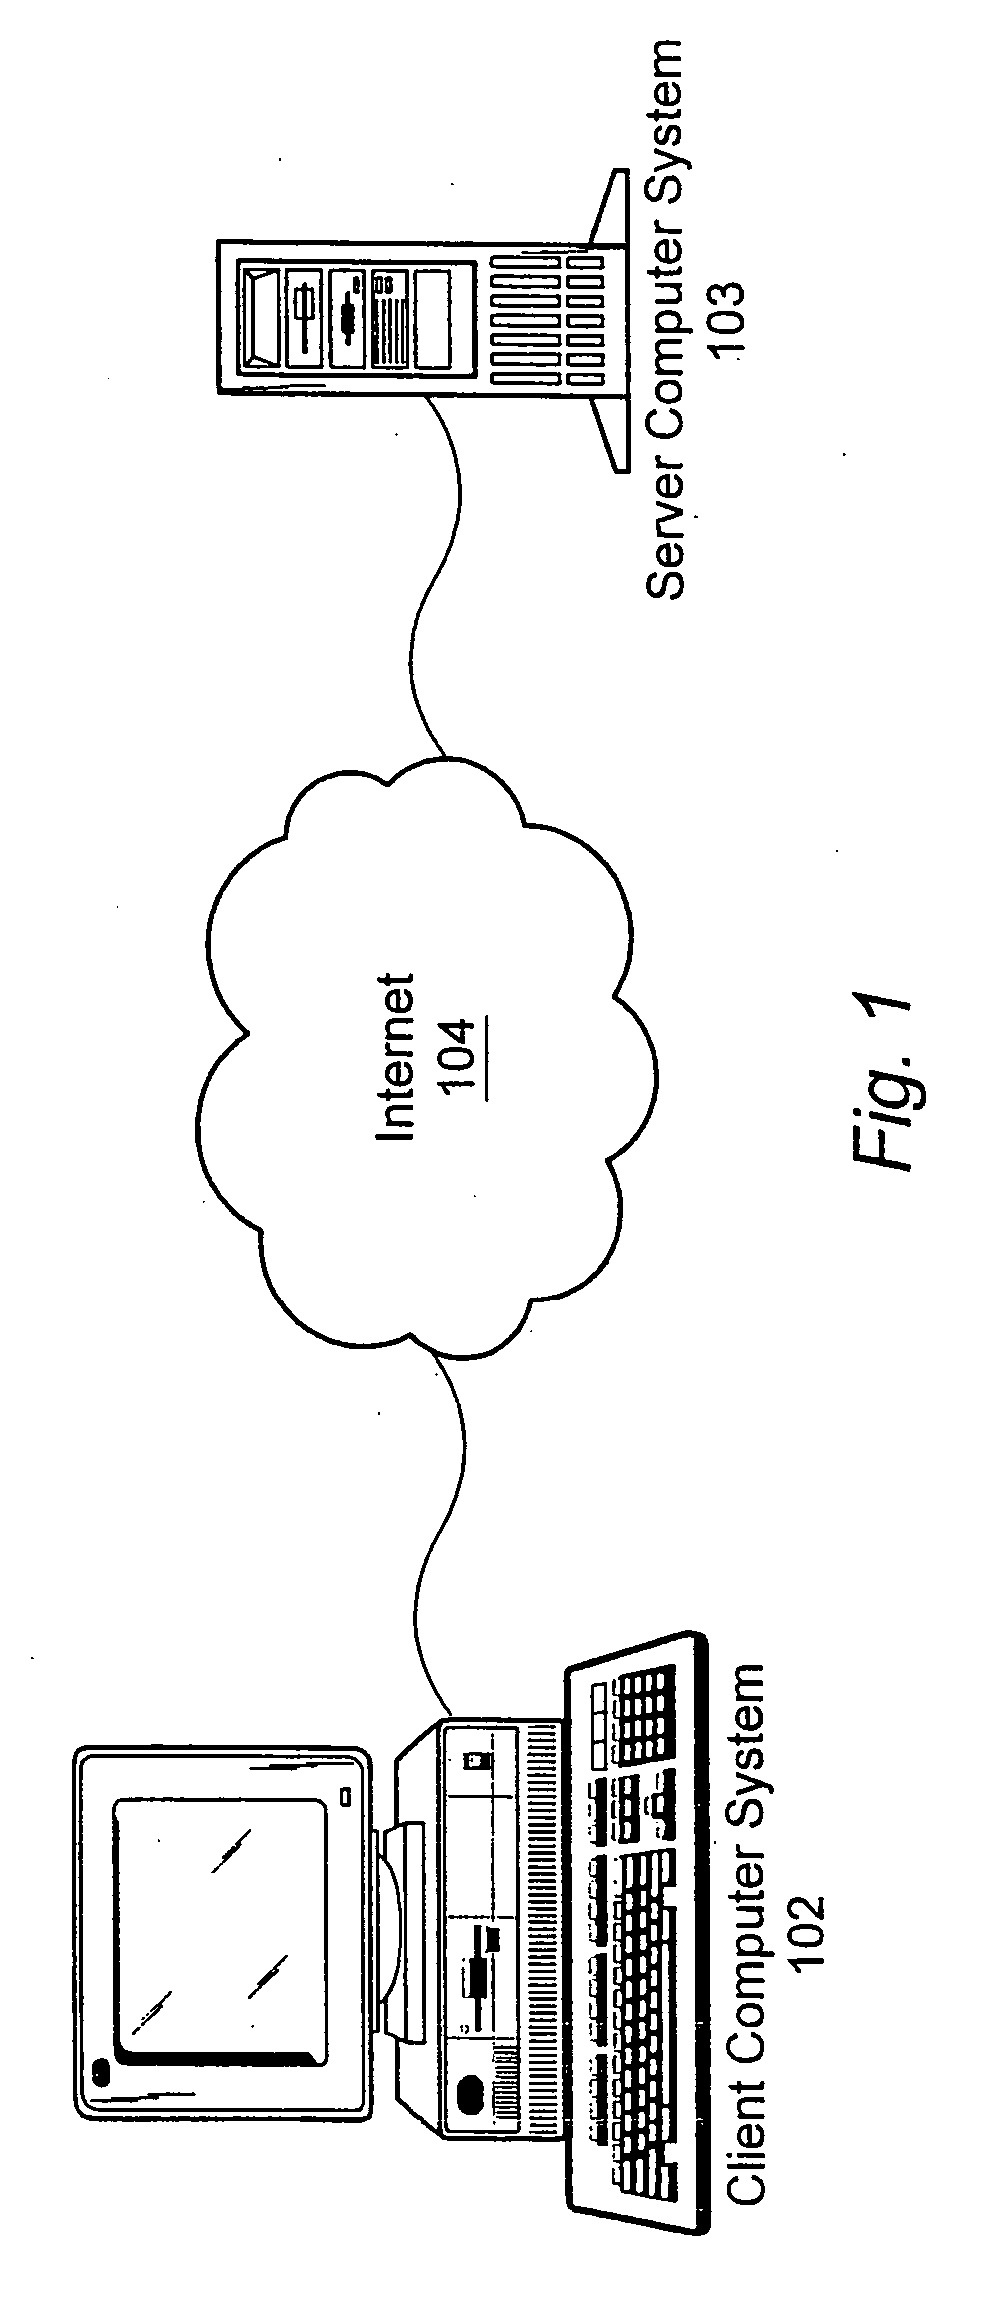 System and method for online specification of a system